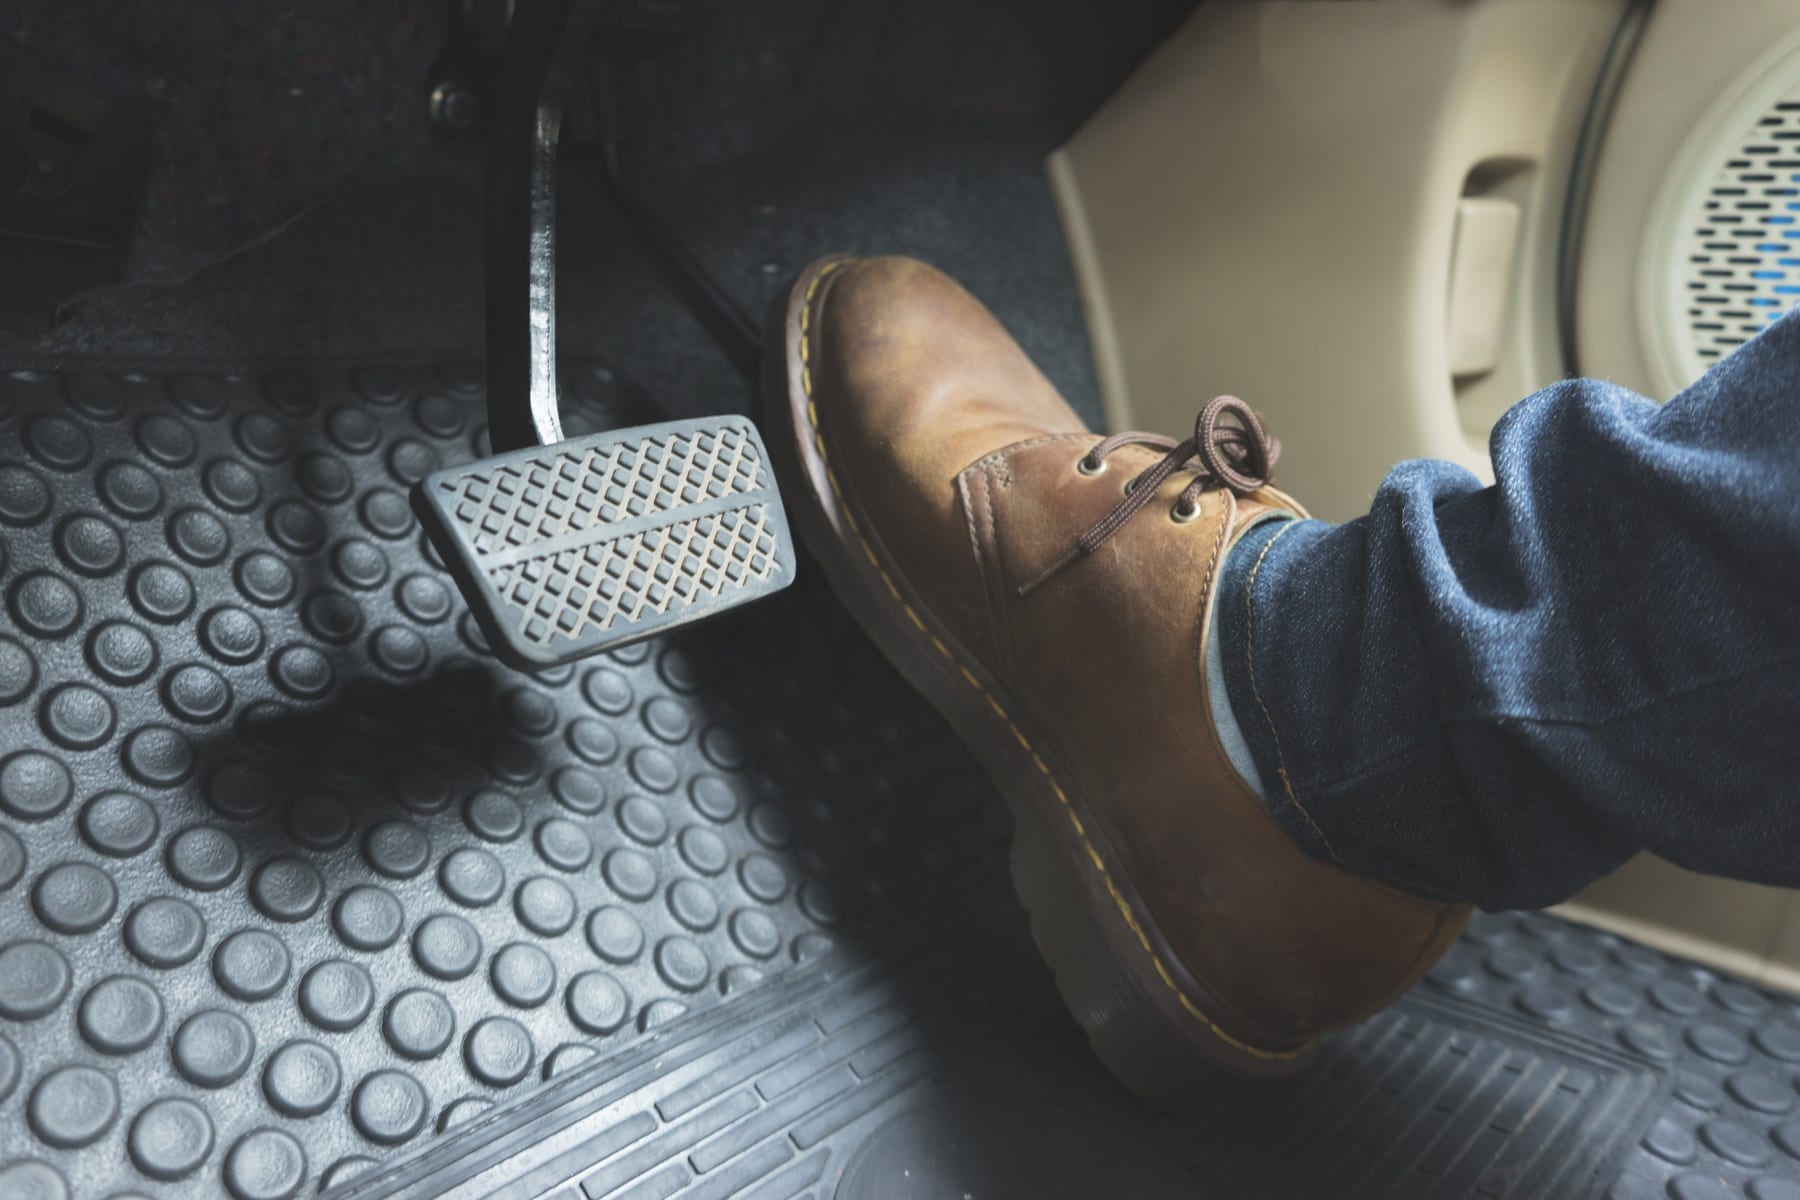 What are the best driving shoes?